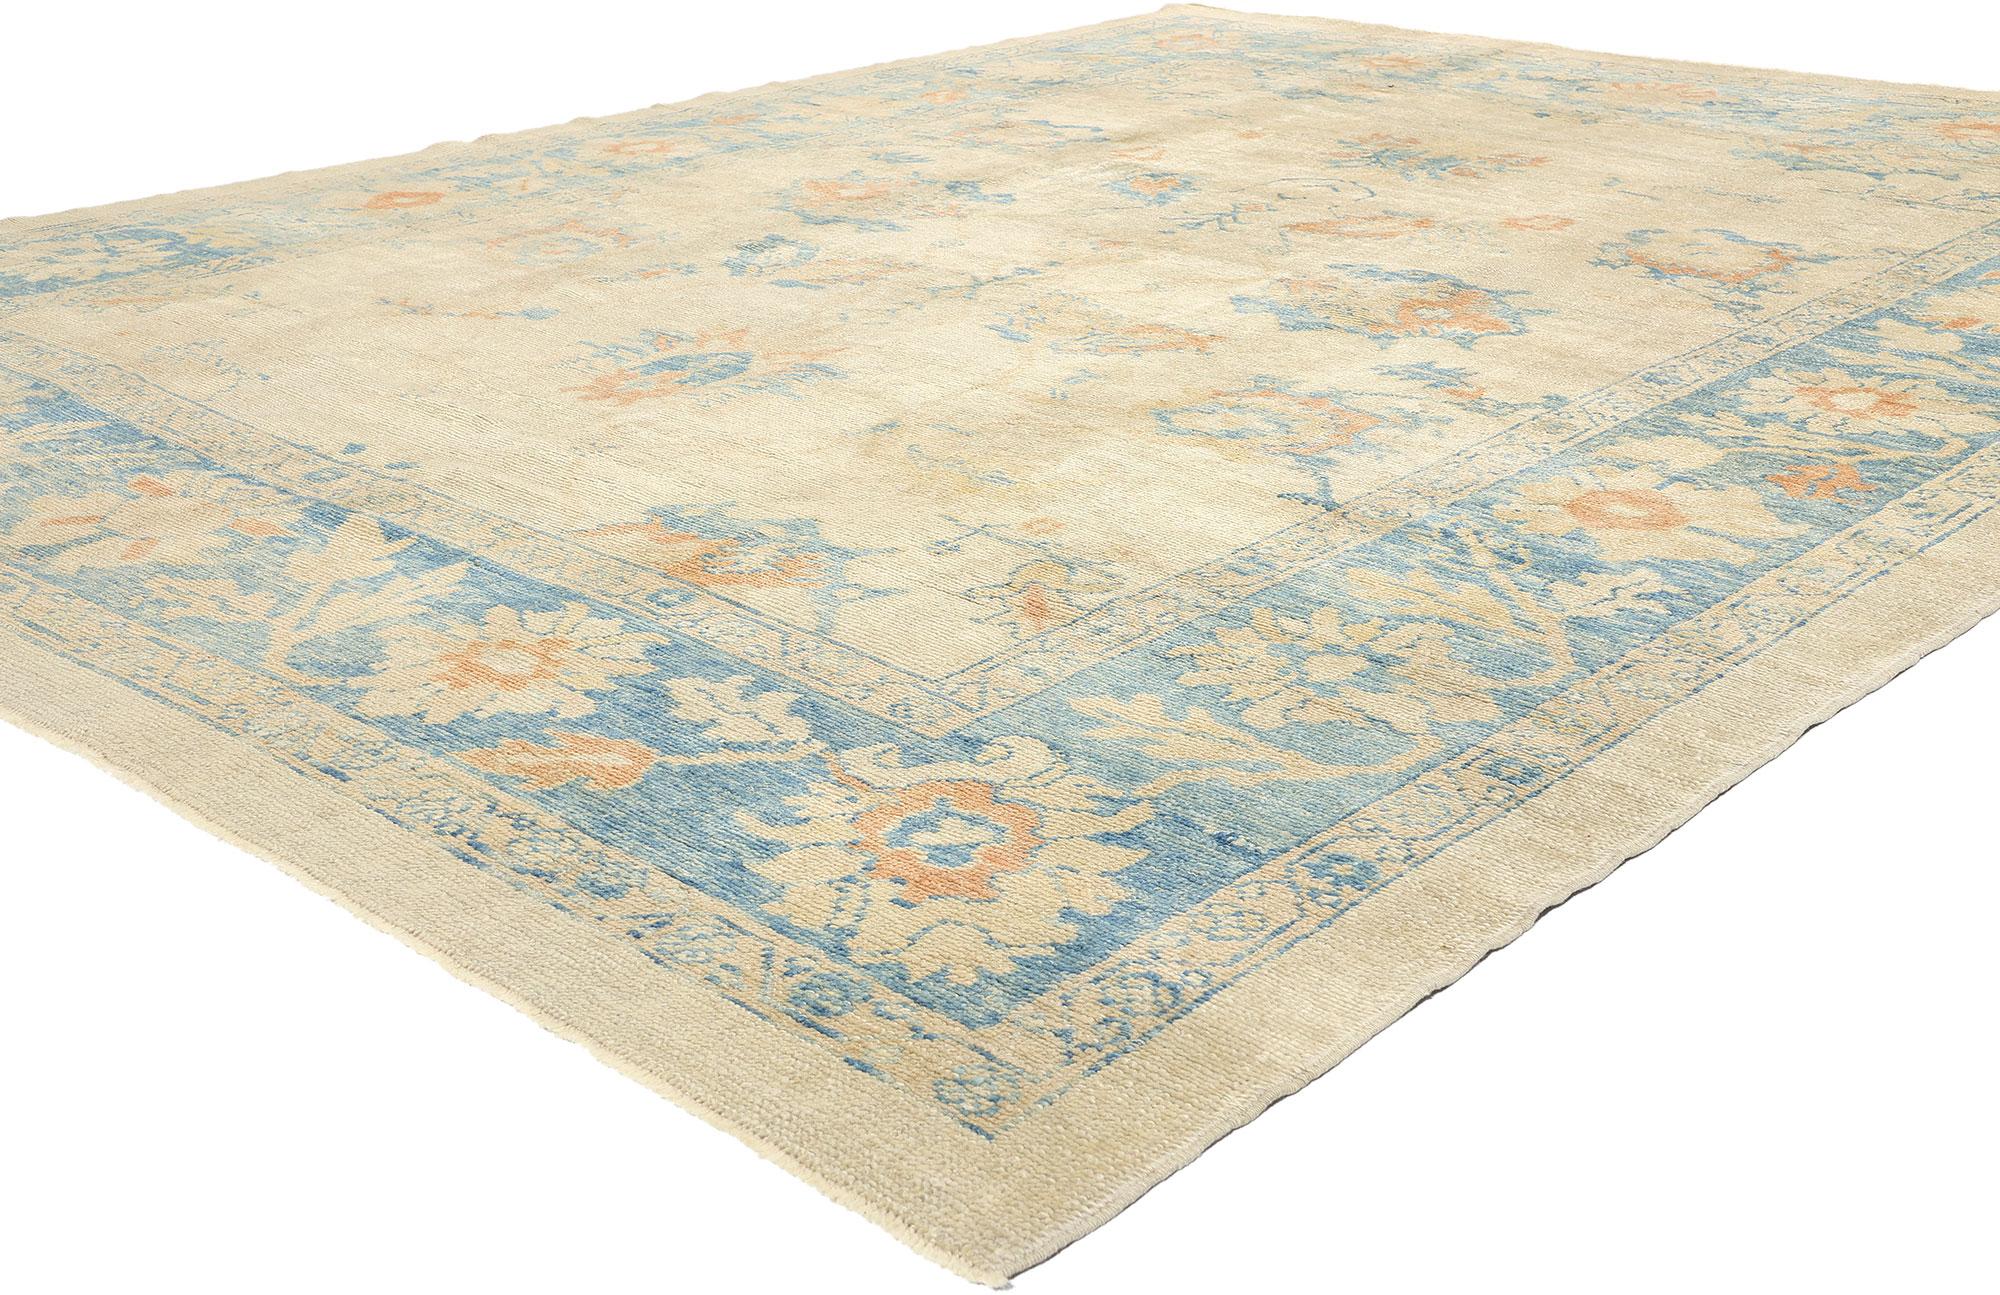 53613 New Modern Turkish Oushak Rug, 09'04 x 11'10. In this hand-knotted wool Turkish Oushak rug, relaxed refinement converges with Anatolian charm to create a captivating blend of styles. Against a neutral sandy-beige backdrop, an intricate allover